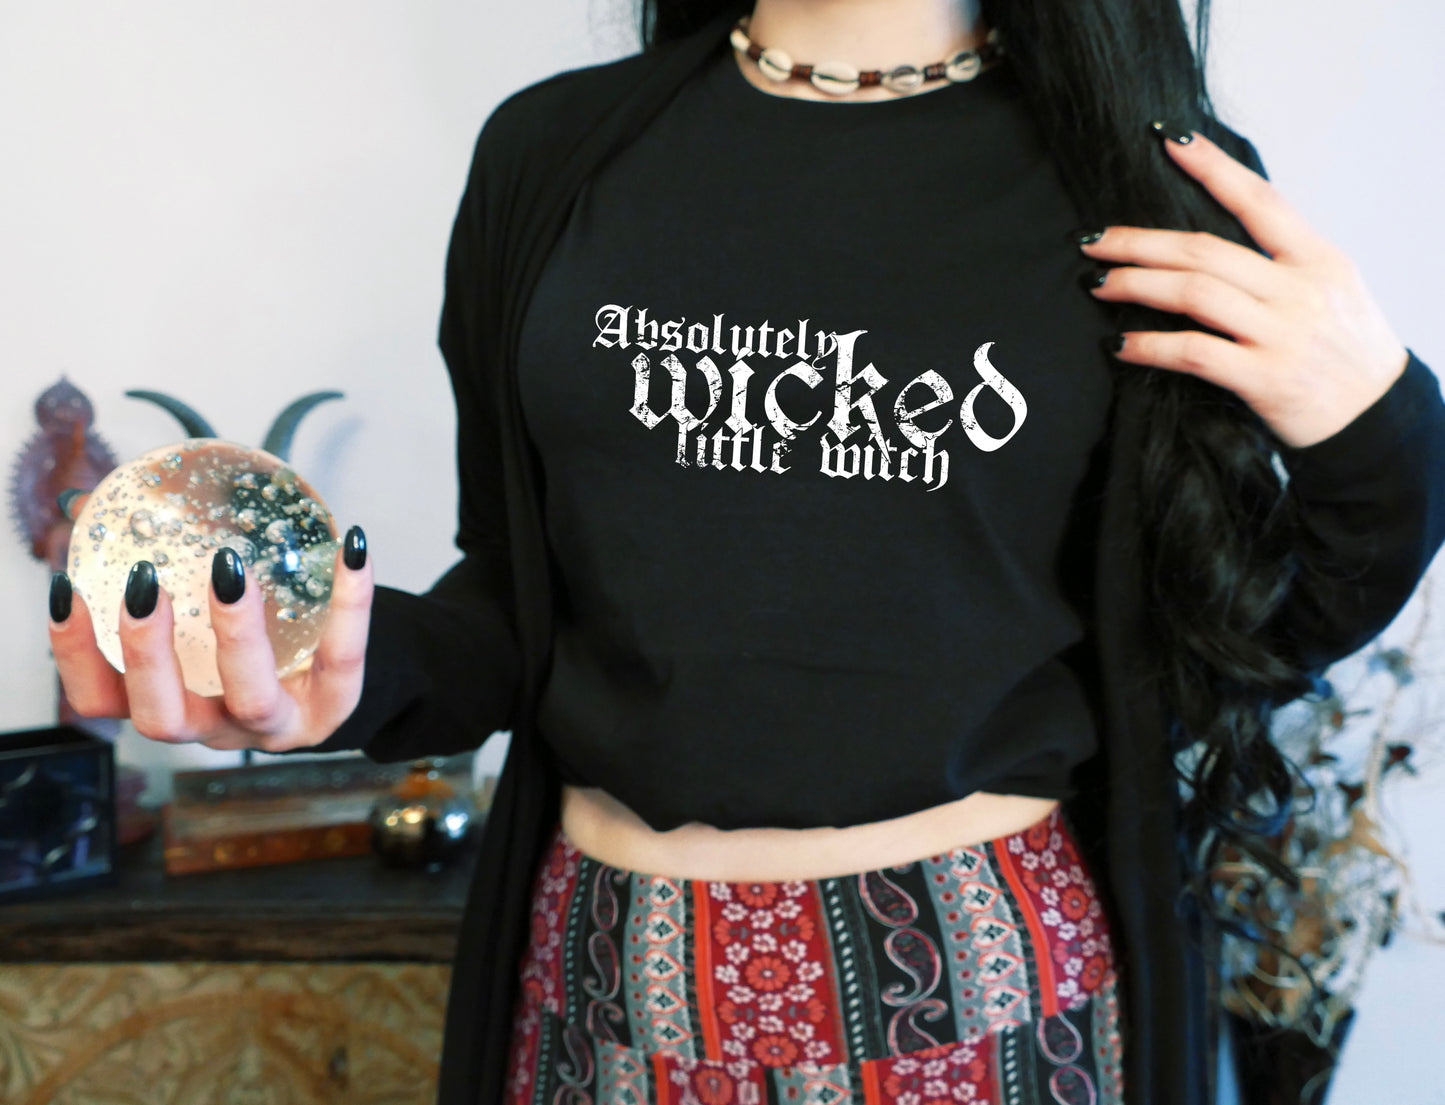 Absolutely Wicked Little Witch -Tee - White Decal -Licensed